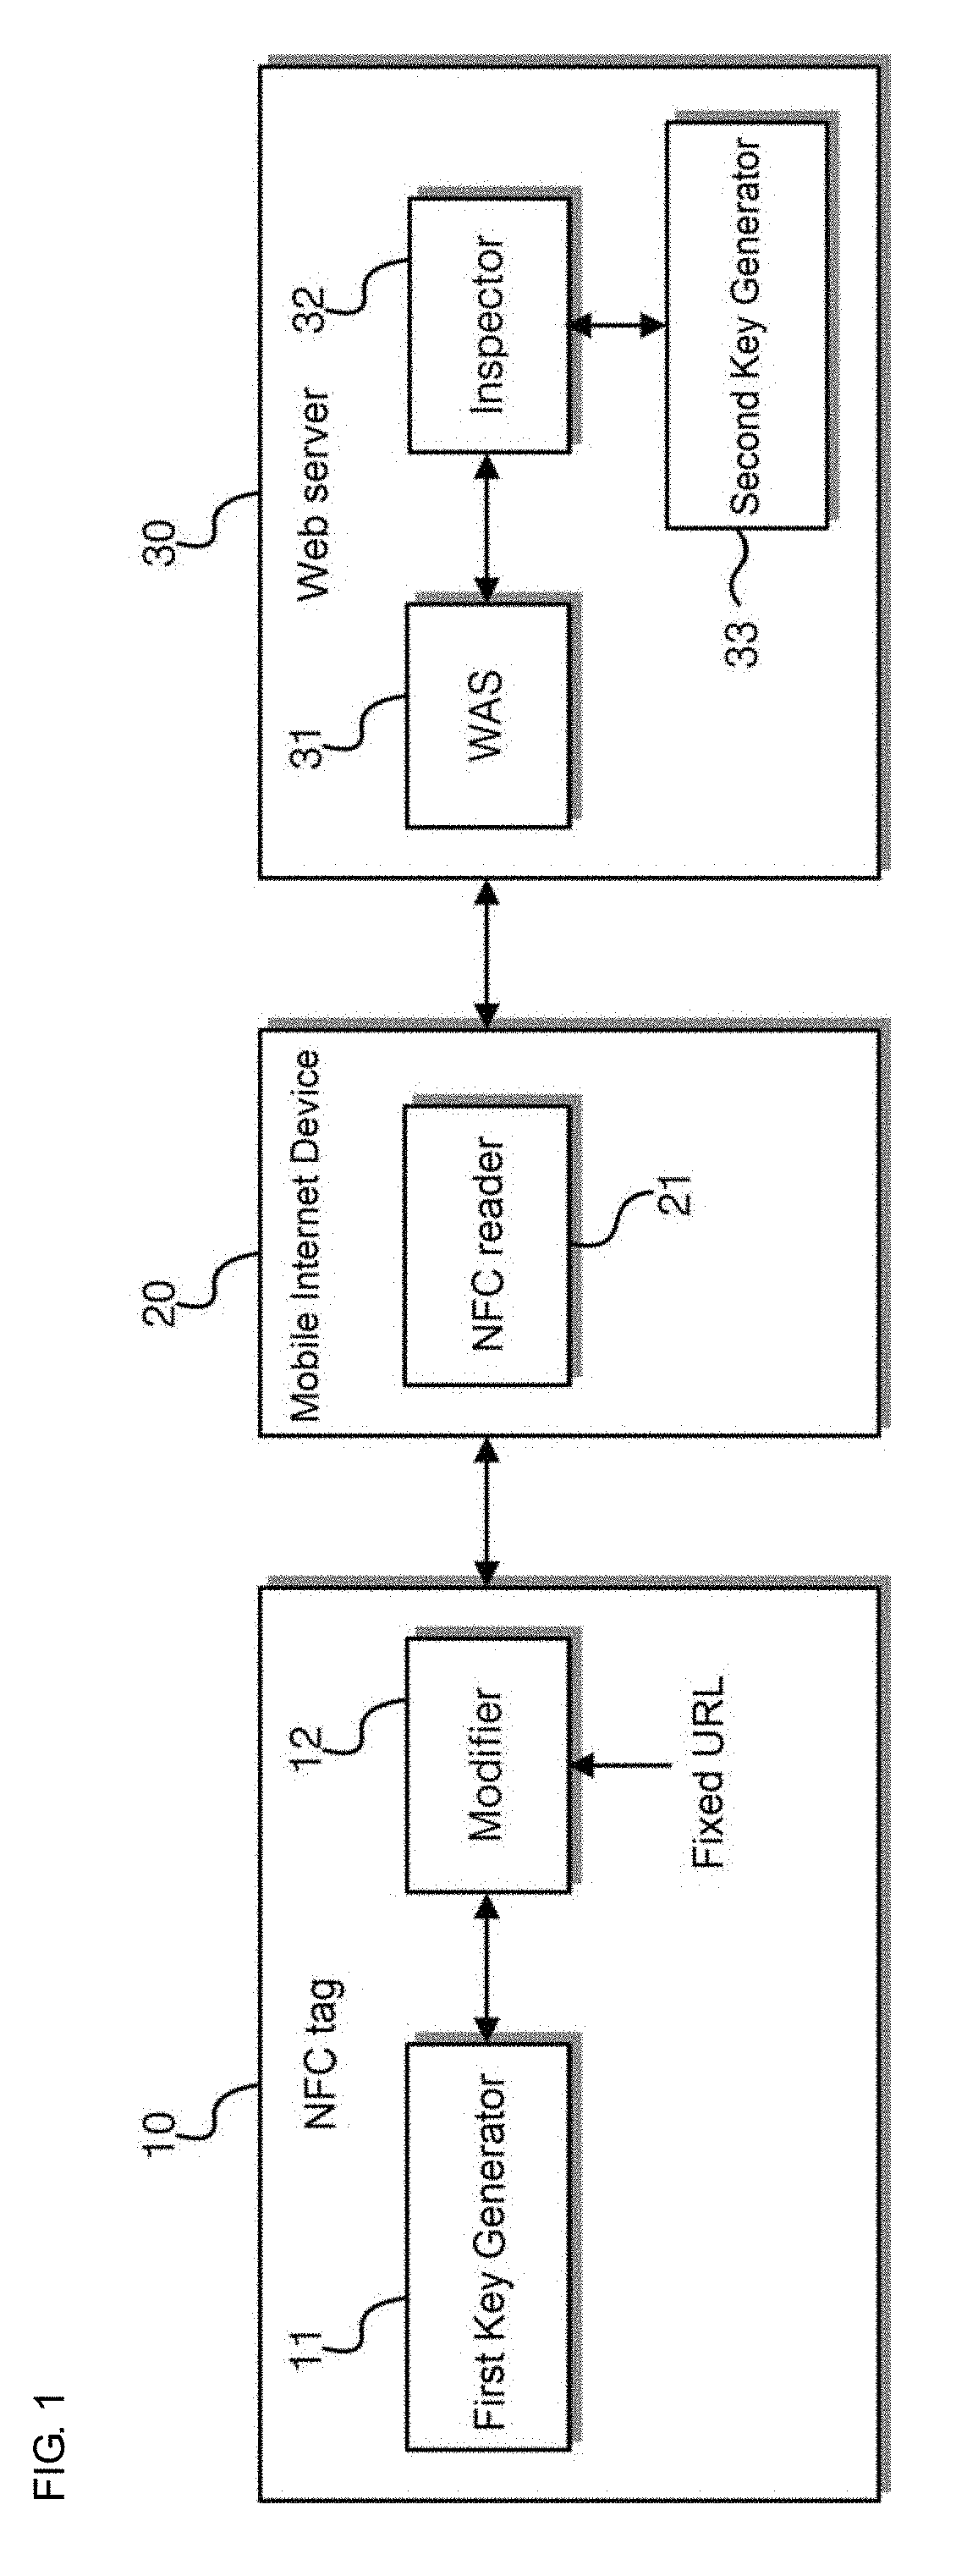 NFC tag-based web service system and method using Anti-simulation function